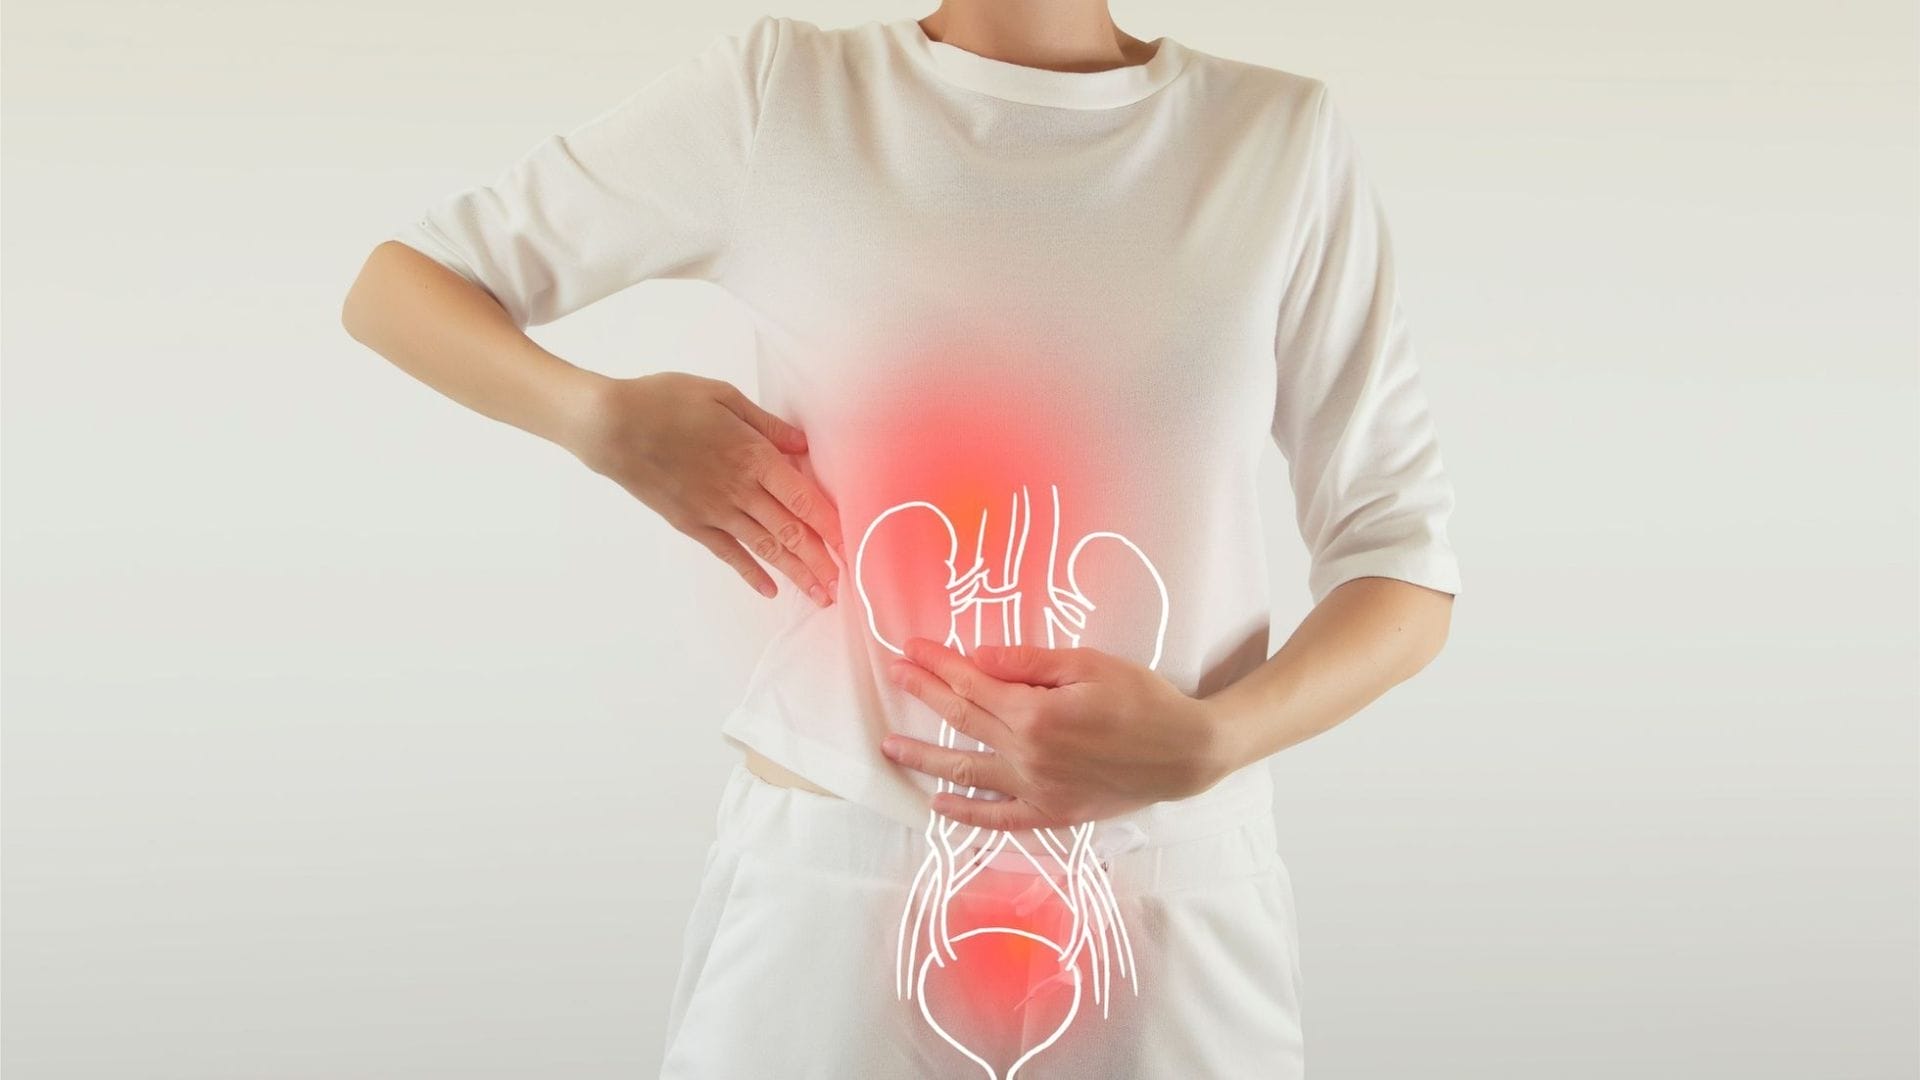 A person is shown with a glowing outline of the urinary system on the abdomen, symbolizing the importance of understanding health insurance benefits for covering medical procedures and conditions.